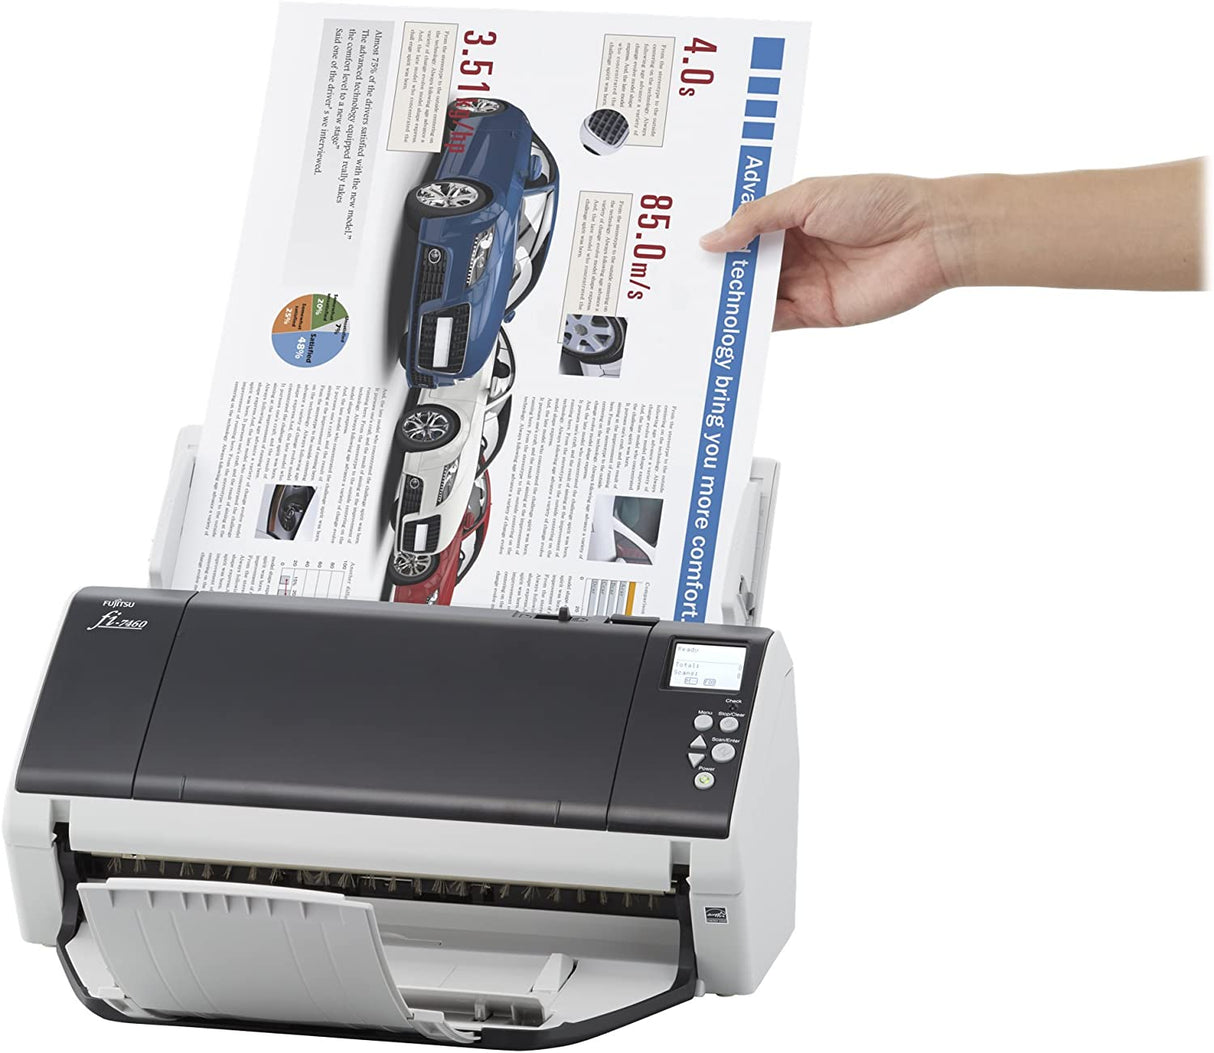 Fujitsu fi-7480 High-Performance Wide-Format Color Duplex Document Scanner with Auto Document Feeder (ADF) fi-7480 Wide Format (80 ppm)